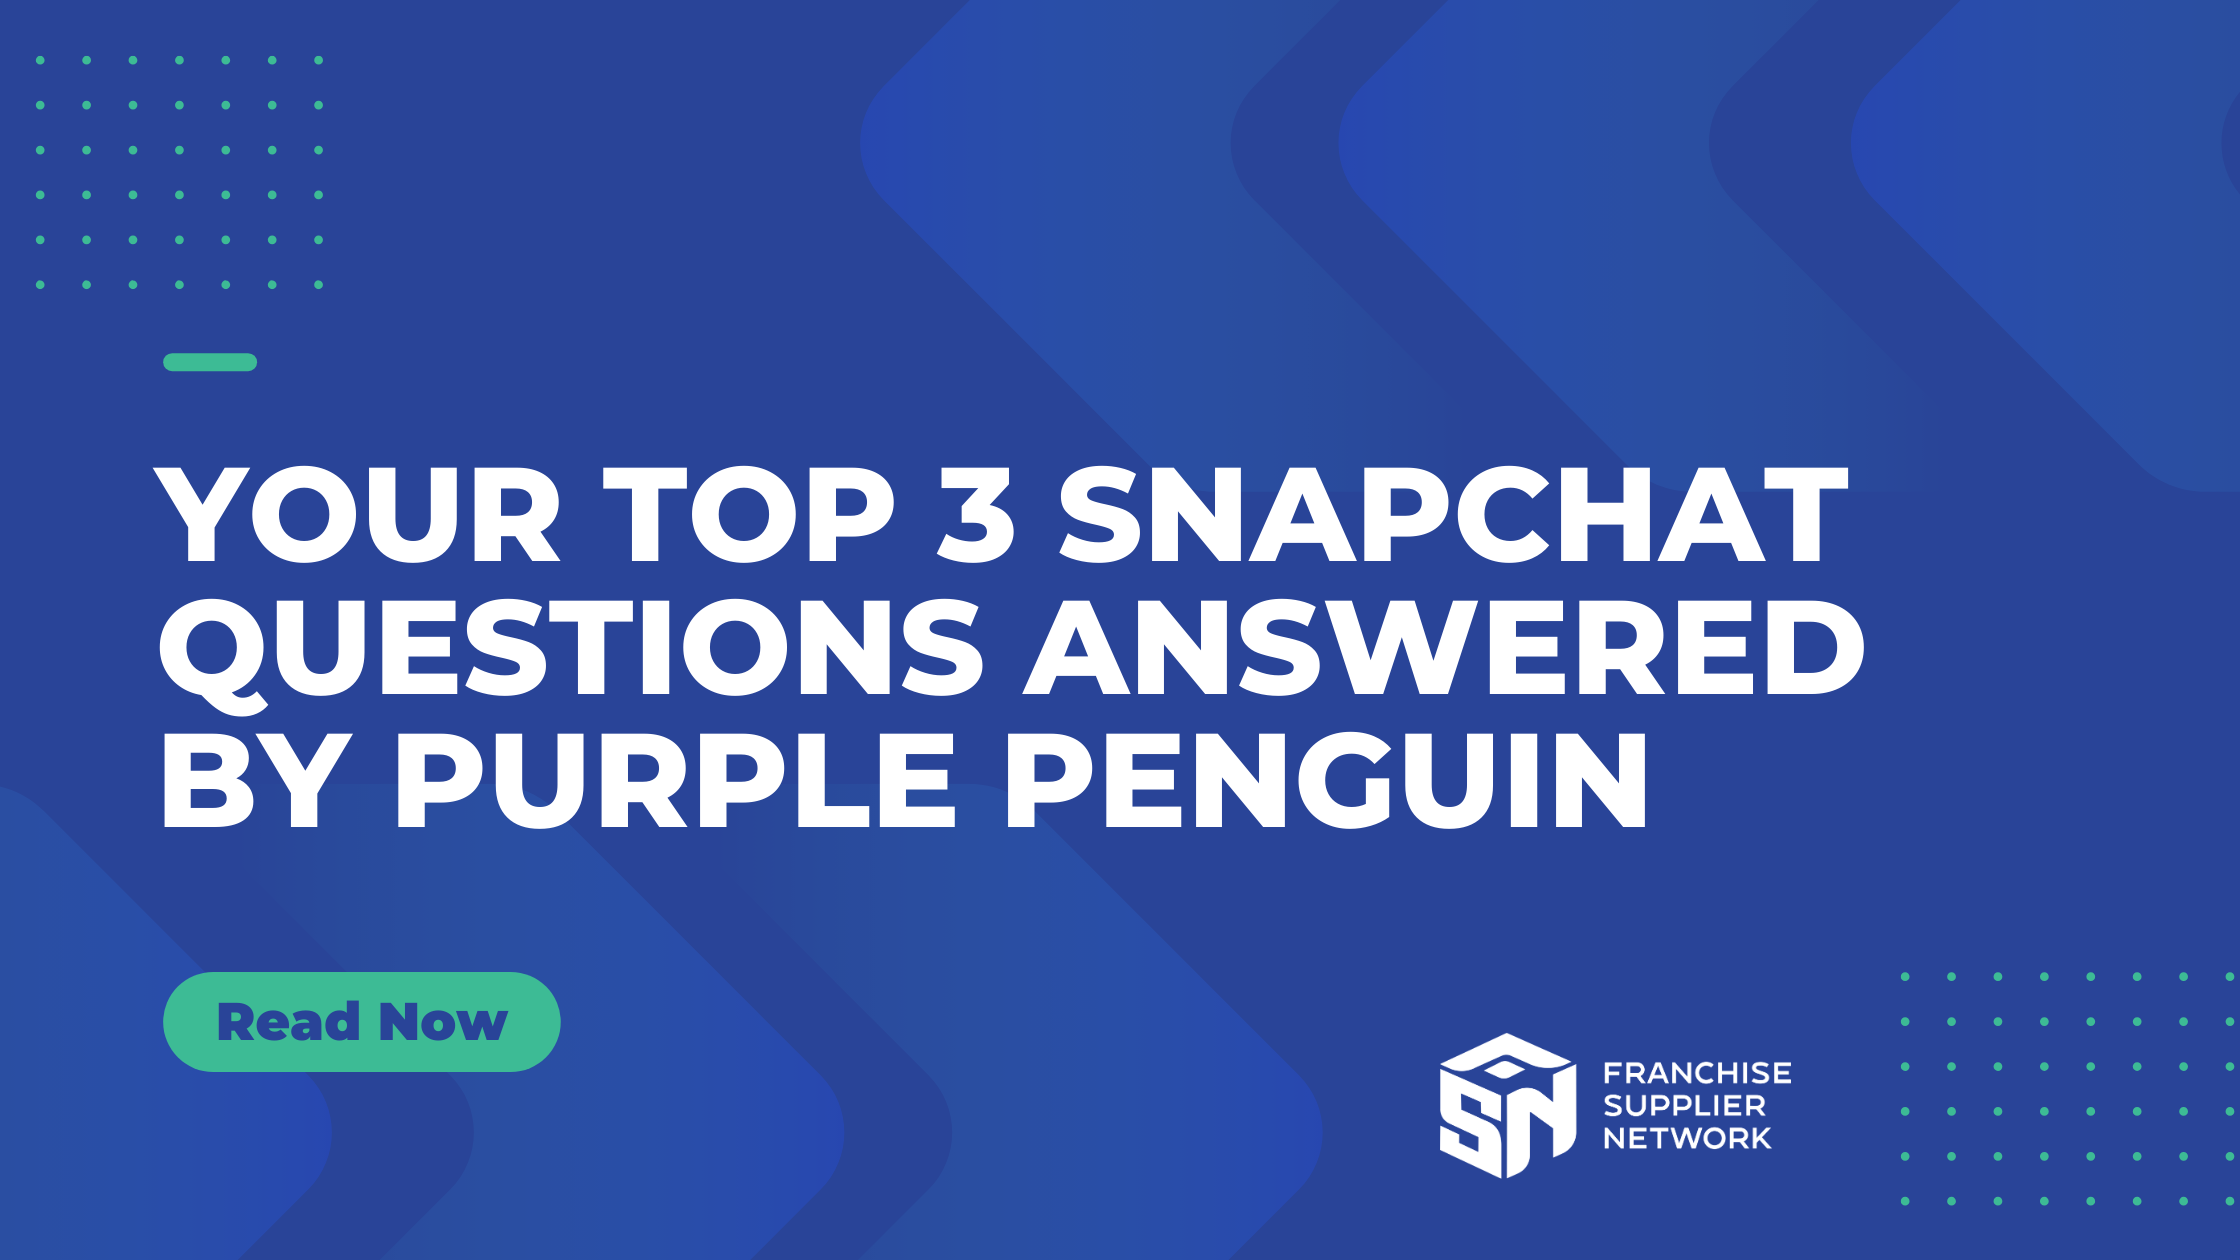 Your Top 3 SNAPCHAT Questions Answered by Purple Penguin